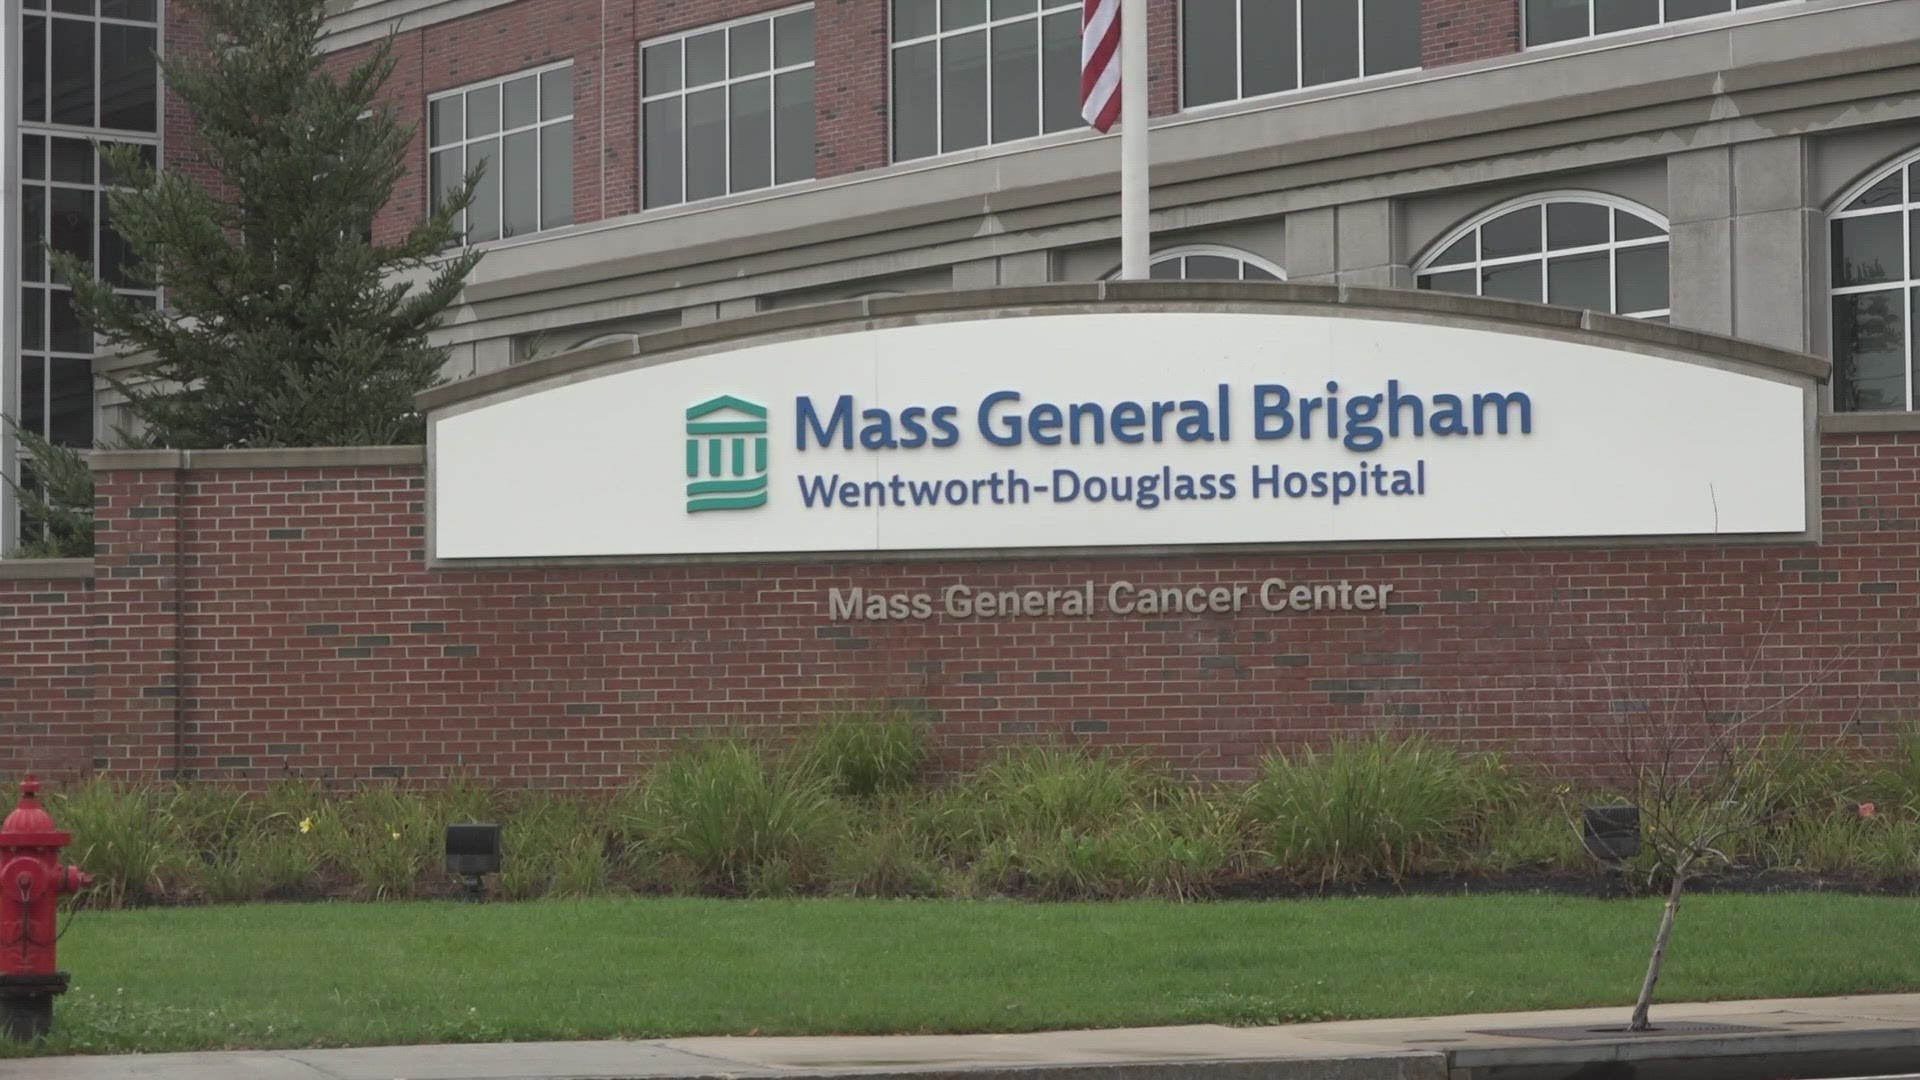 The birthing center is slated to close on Sept. 25, the hospital announced Tuesday.